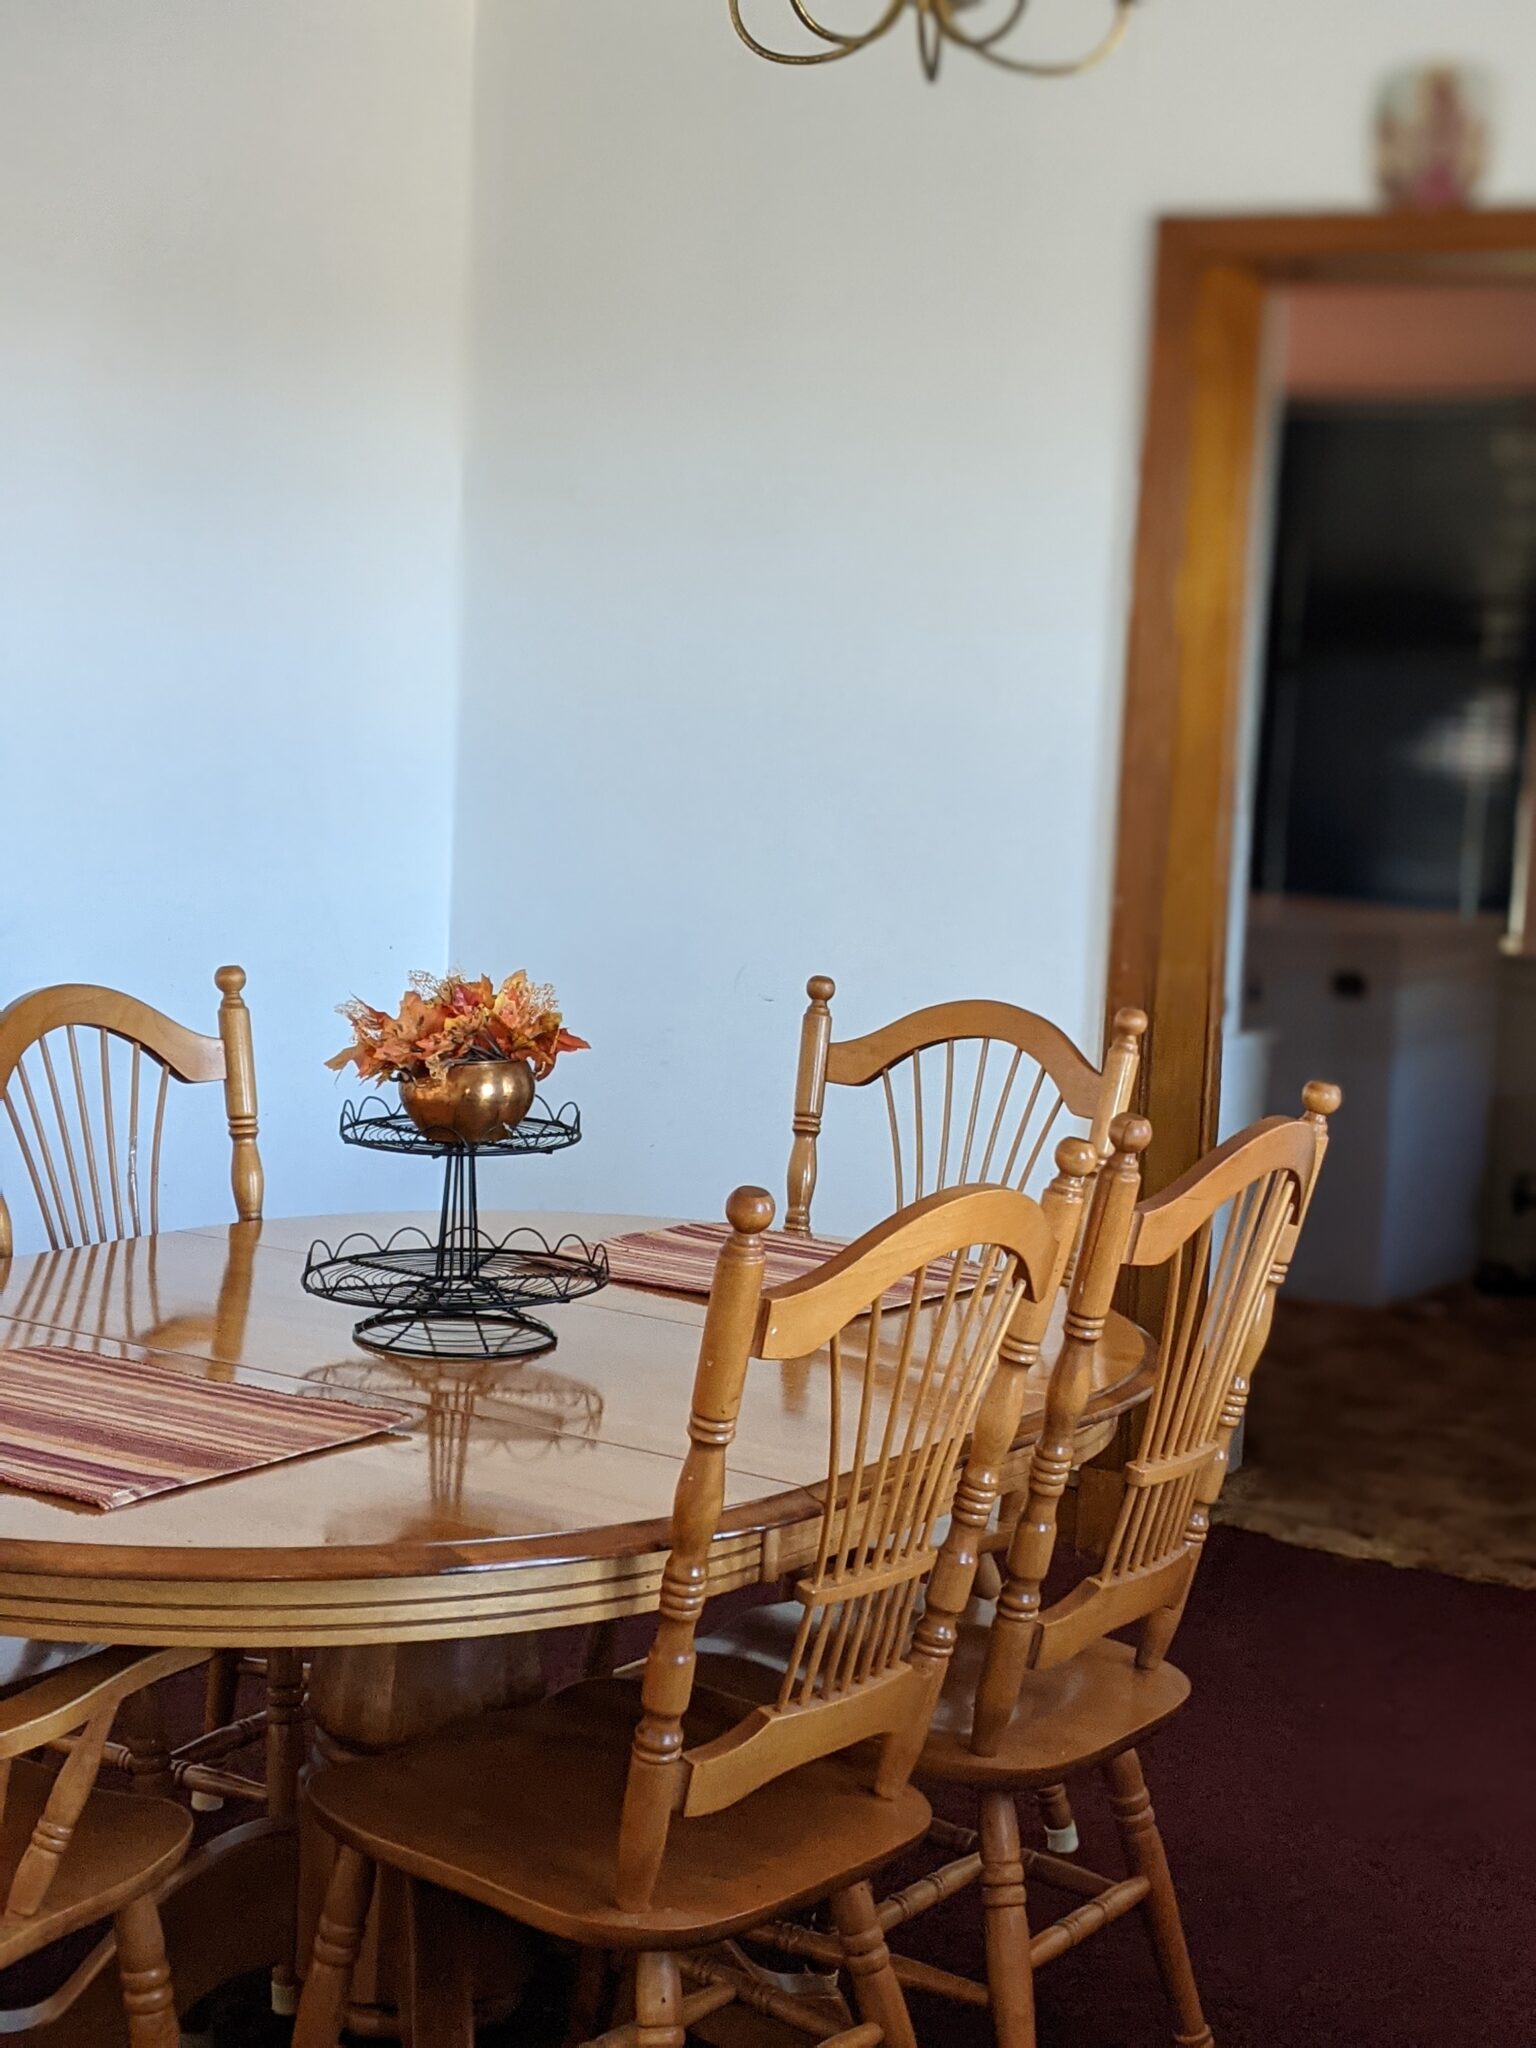 This pictures shows the dining room of the Temple Hills Fresh Start dining room. There is a wooden table with four wooden chairs.